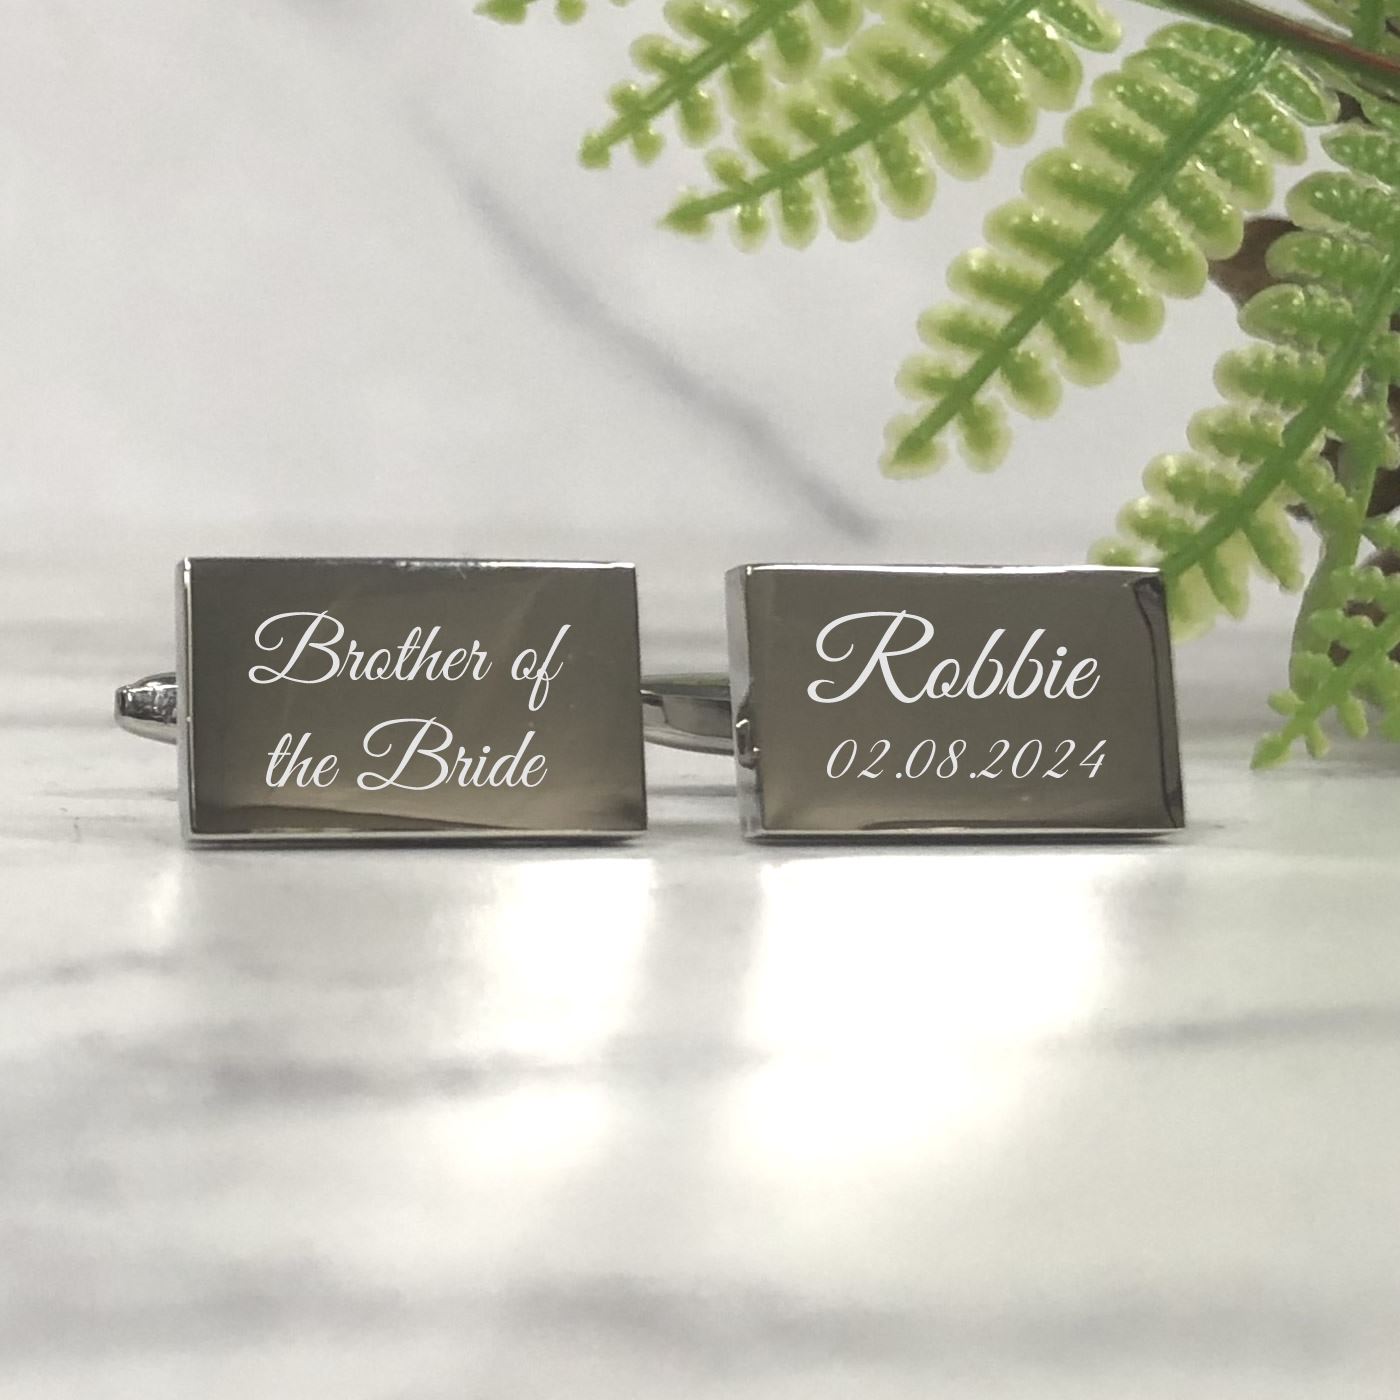 Engraved Wedding Day Rectangular Cufflinks - Brother of the Bride